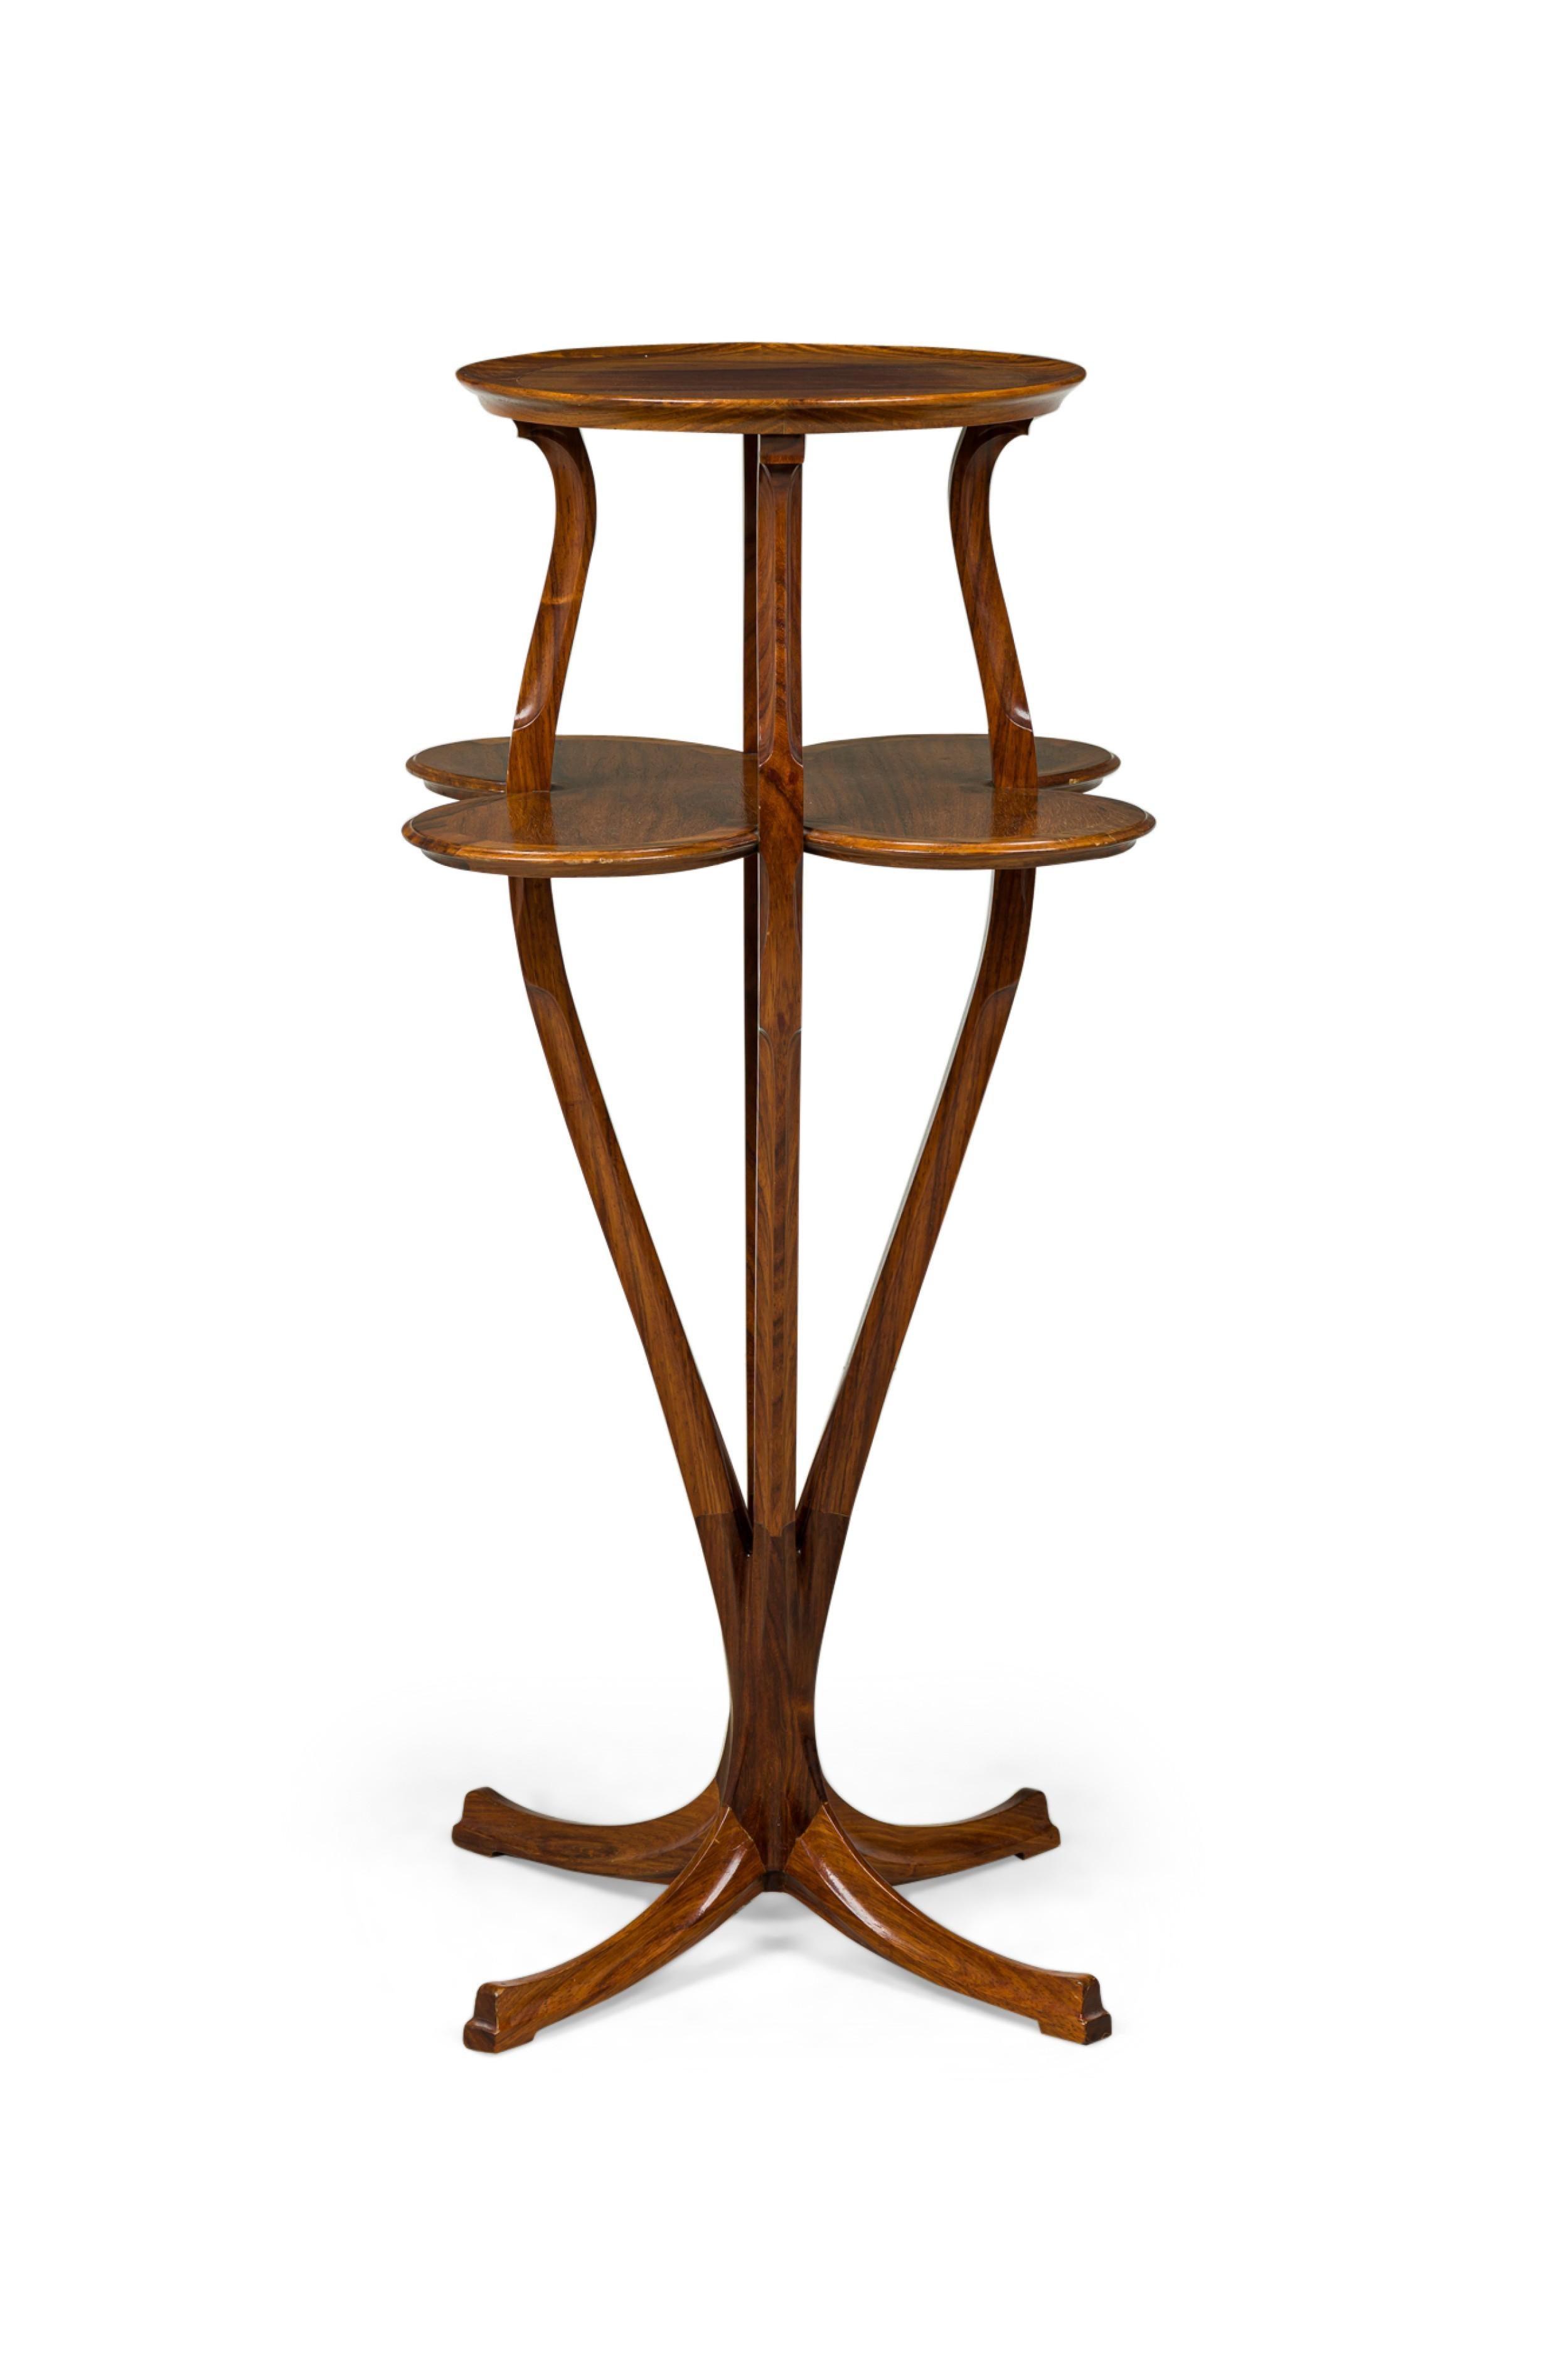 Tony Selmersheim French Art Nouveau Two-Tier Clover Pedestal Table In Good Condition For Sale In New York, NY